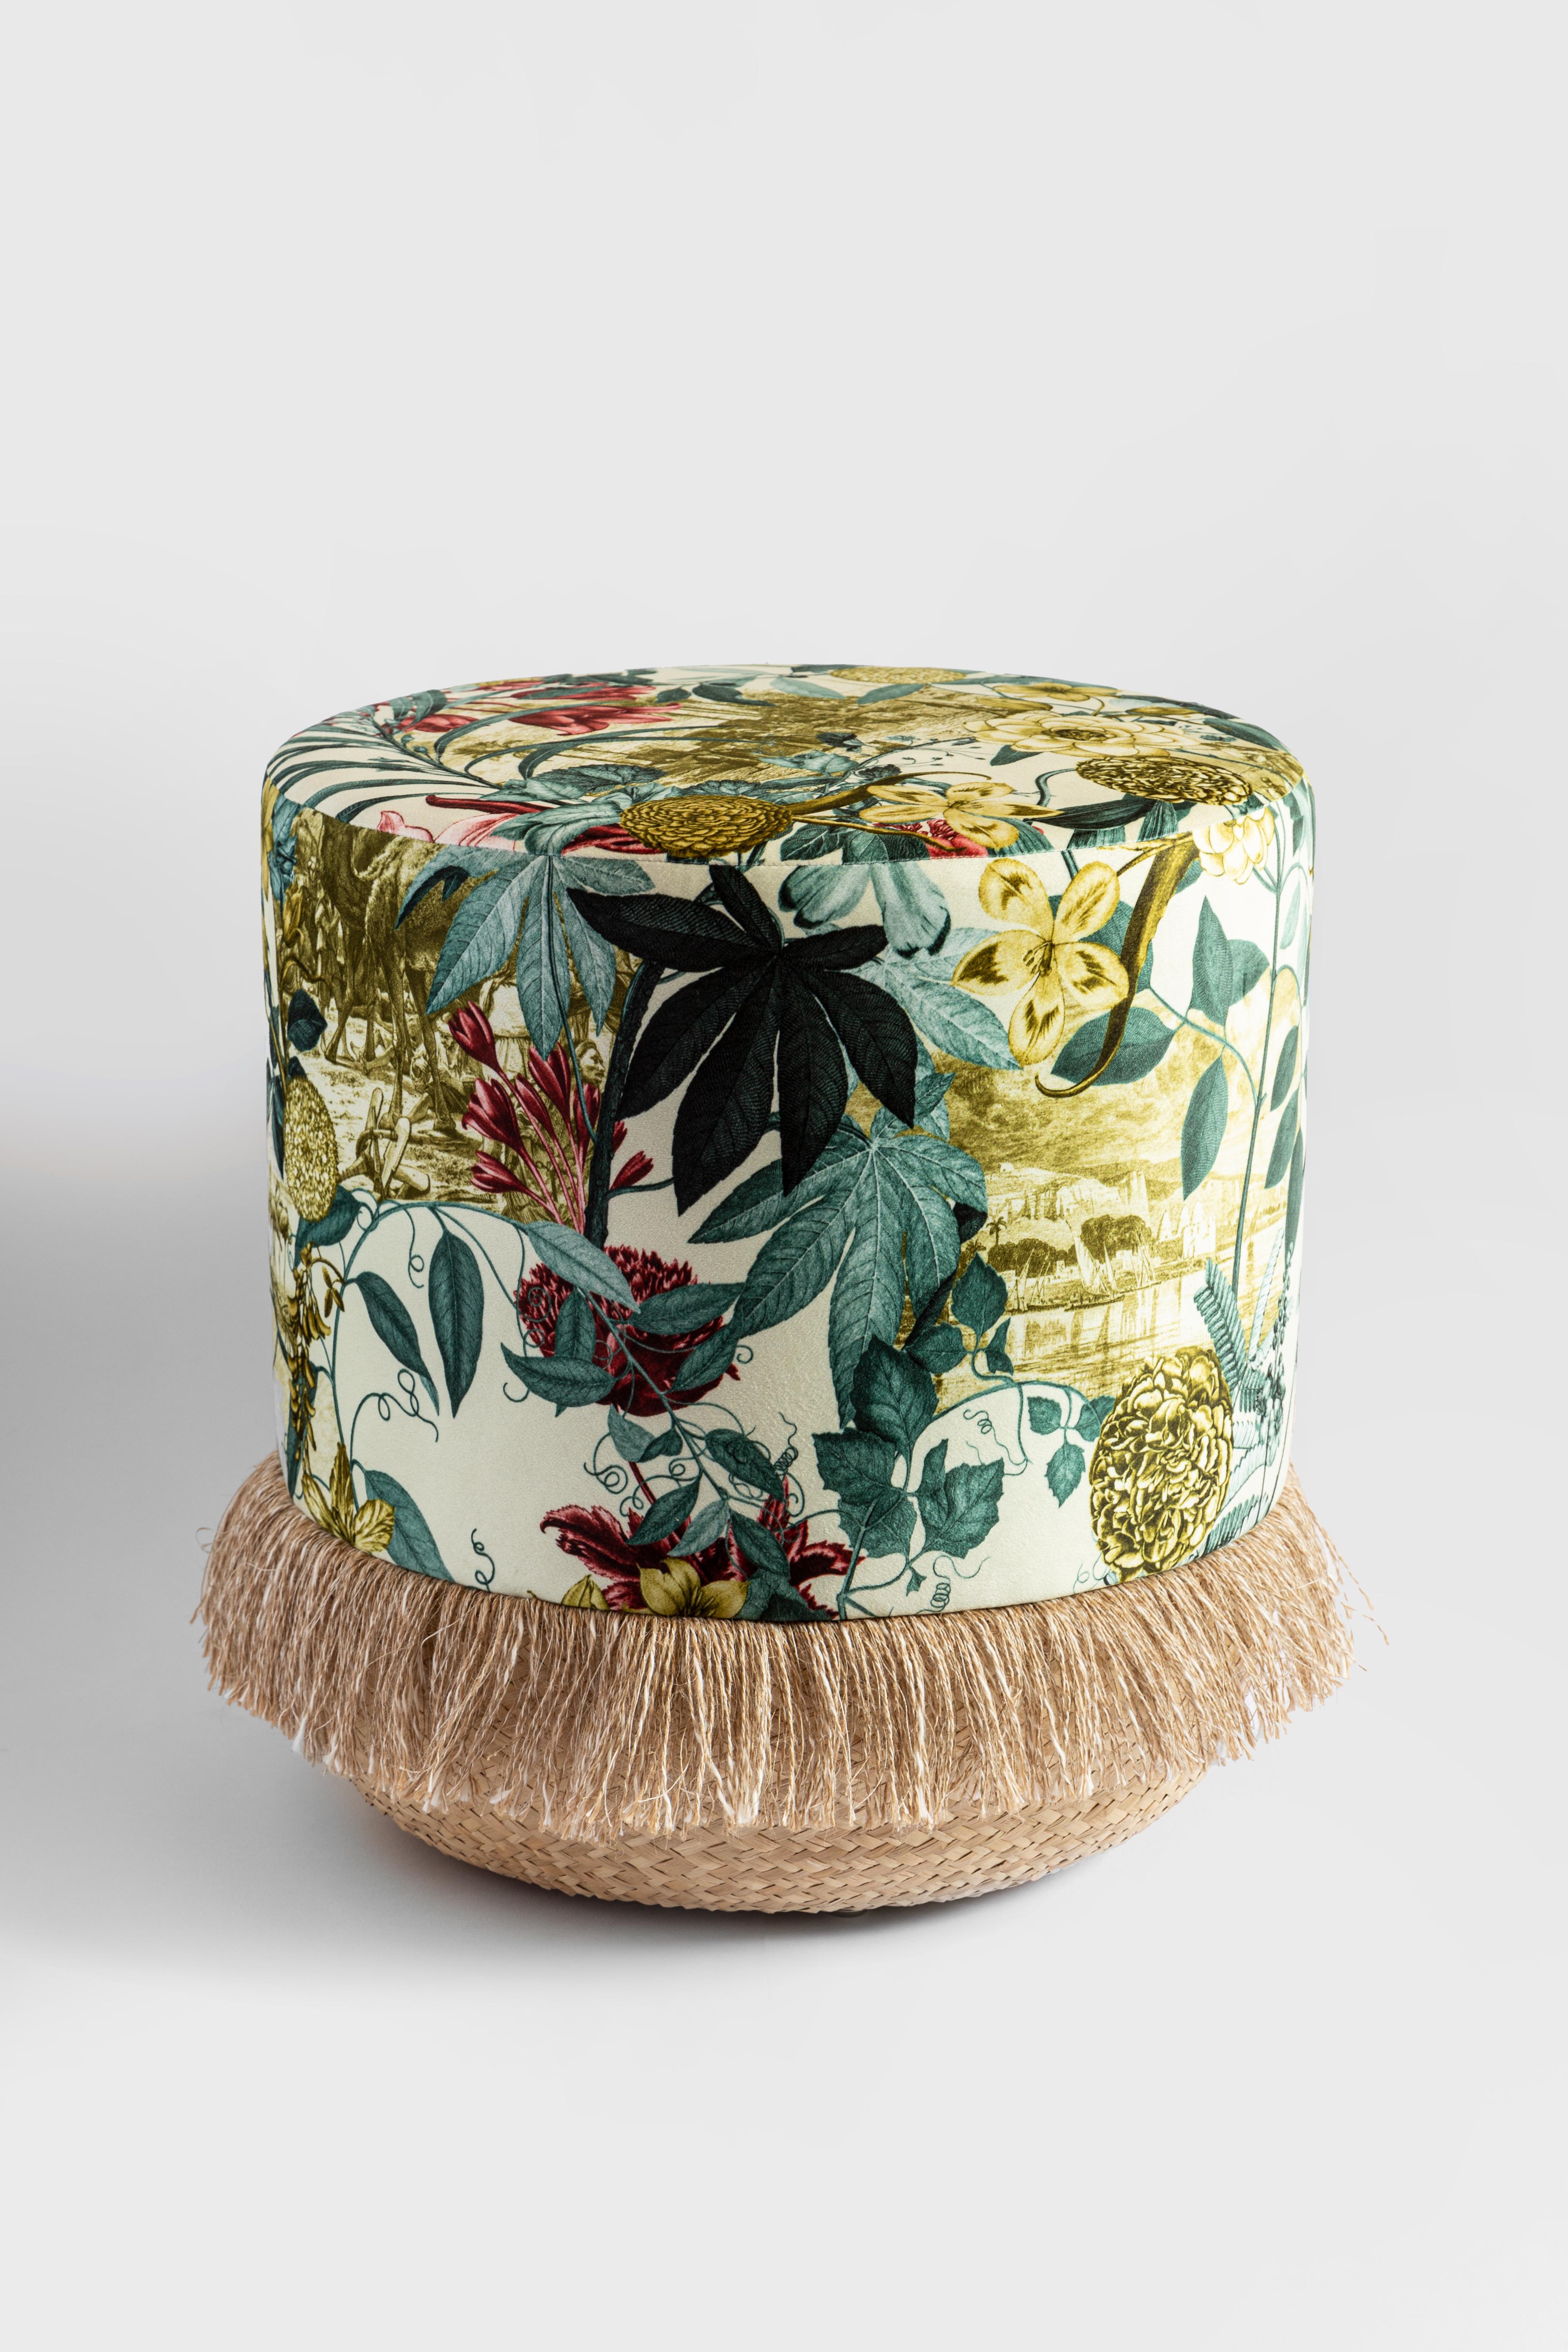 Pouf handmade by Italian expert craftsmen. High quality straw base and printed velvet covering.
The decoration of this pouf is composed of a composition of leaves and flowers, between them scenes and landscape of the Middle East are hidden.